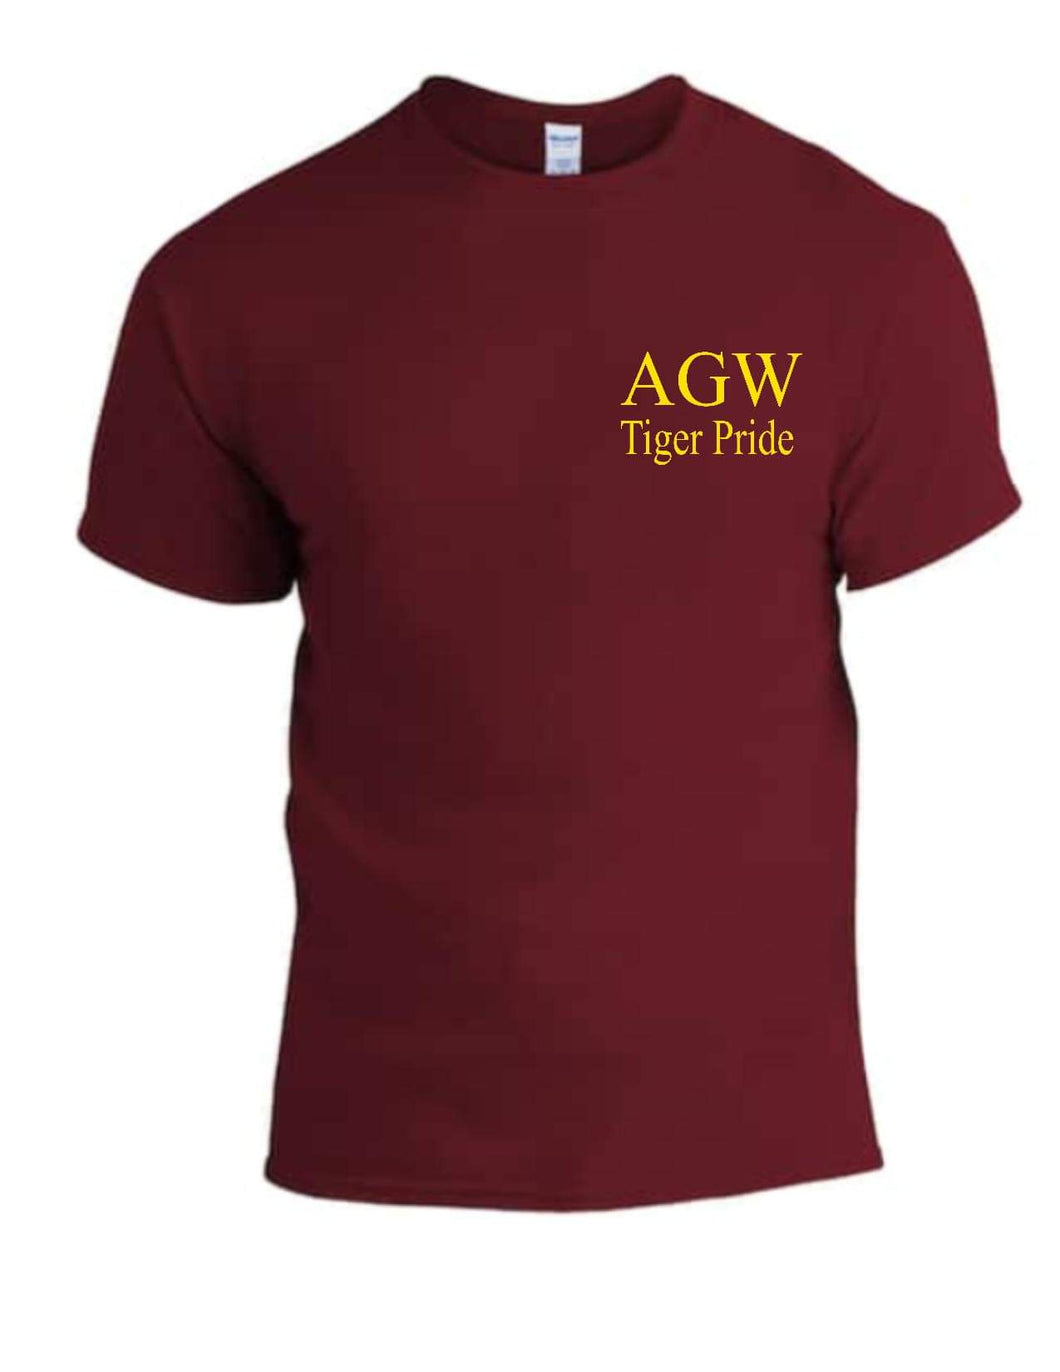 Maroon Tshirt with AGWTP embroidery in yellow gold thread